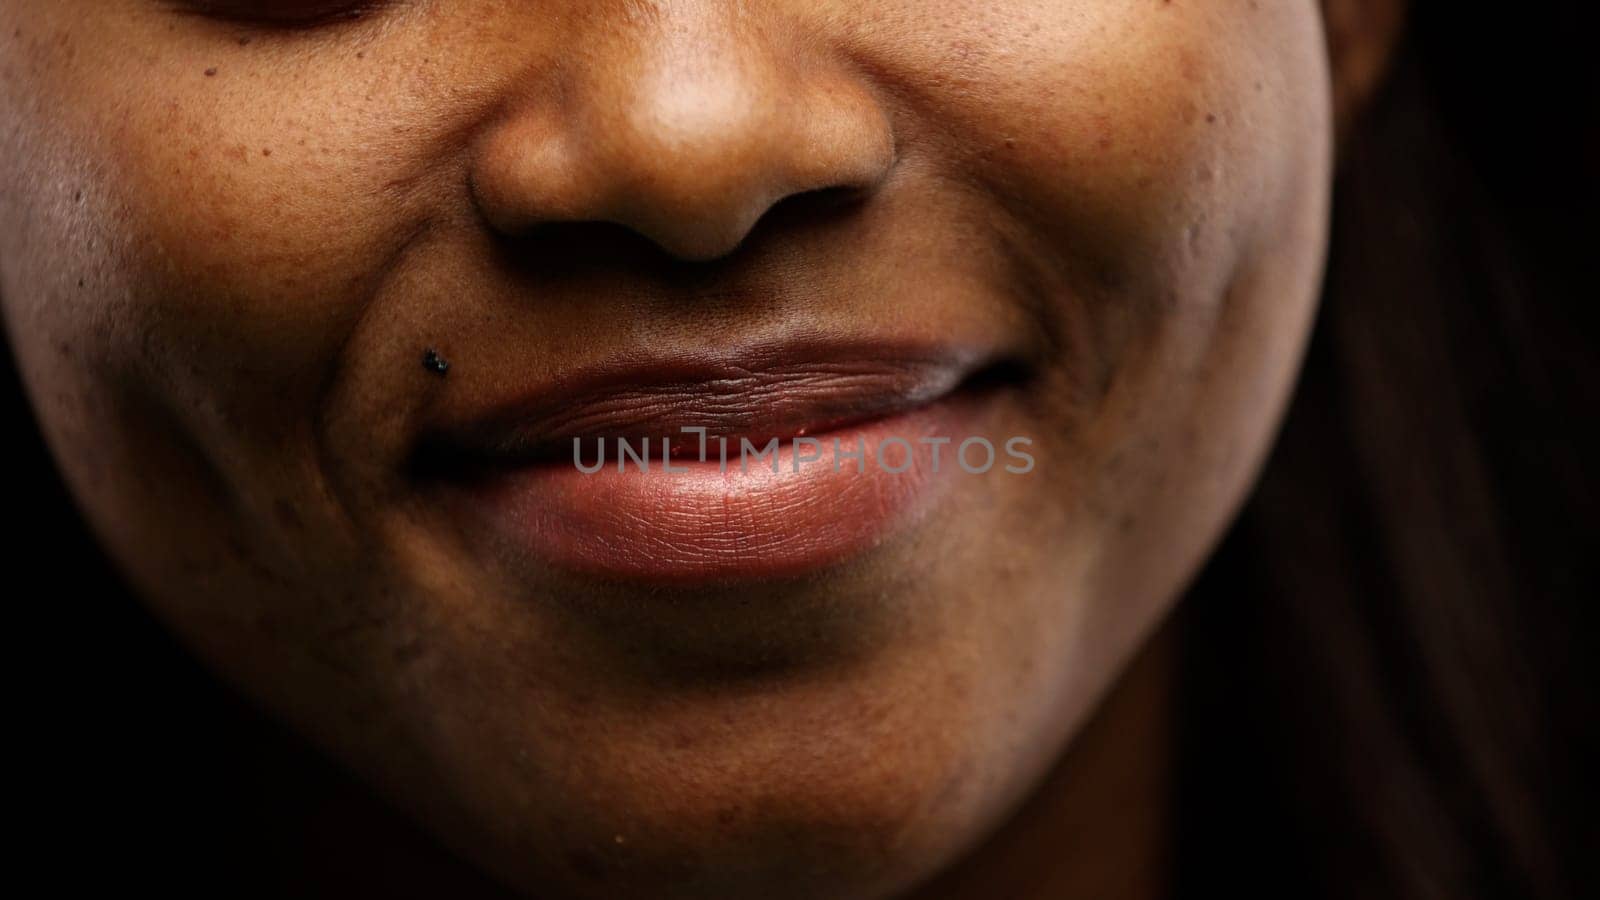 Woman's mouth, mouth closed, close-up.